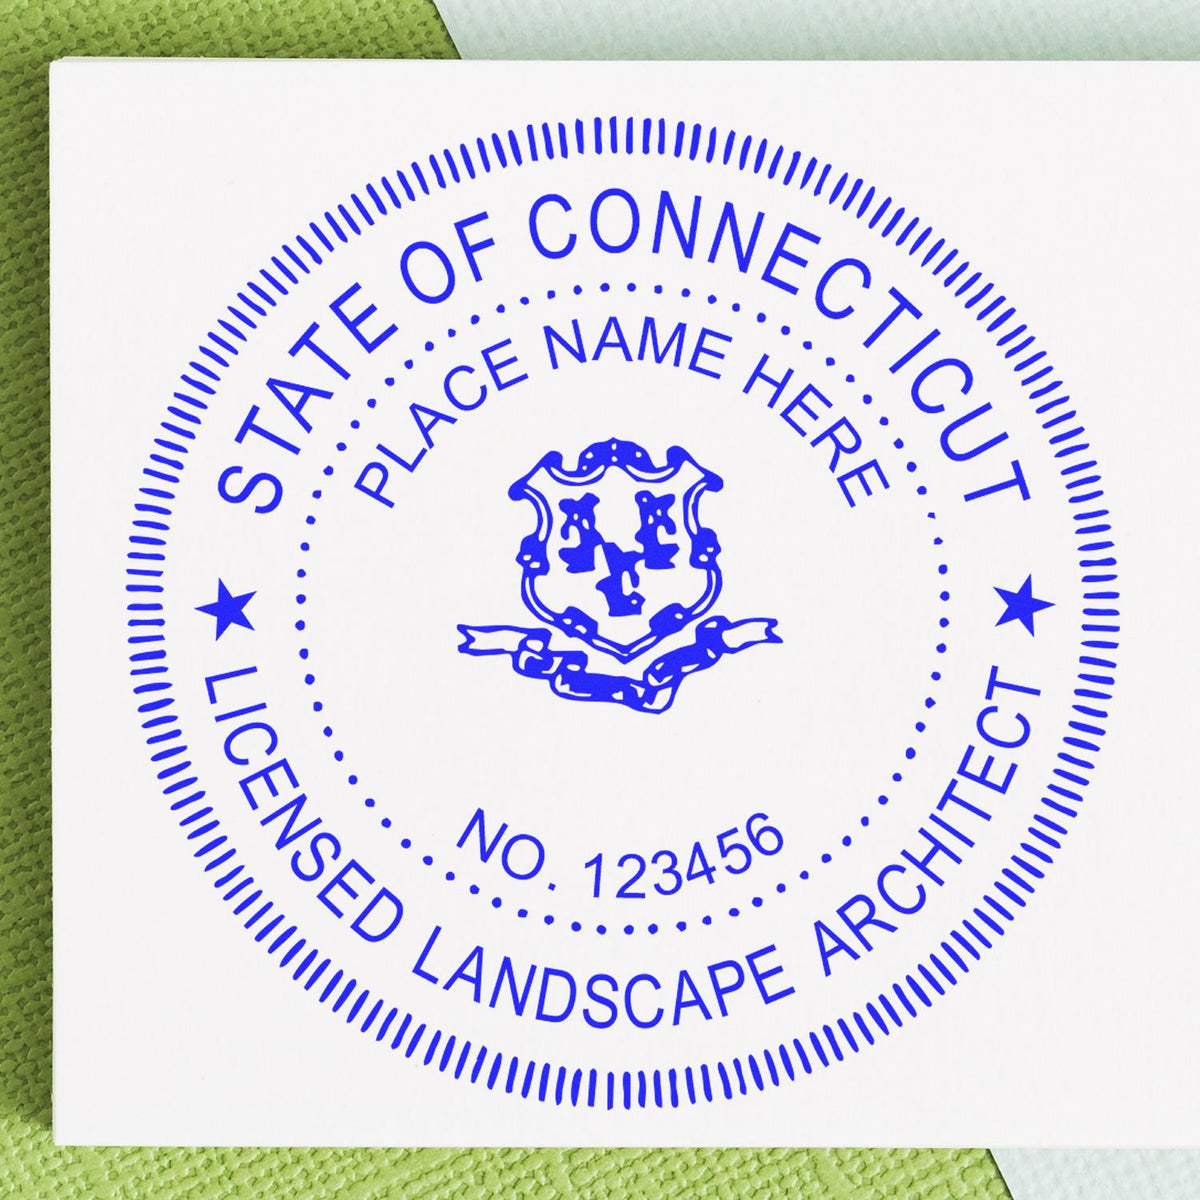 The Slim Pre-Inked Connecticut Landscape Architect Seal Stamp stamp impression comes to life with a crisp, detailed photo on paper - showcasing true professional quality.